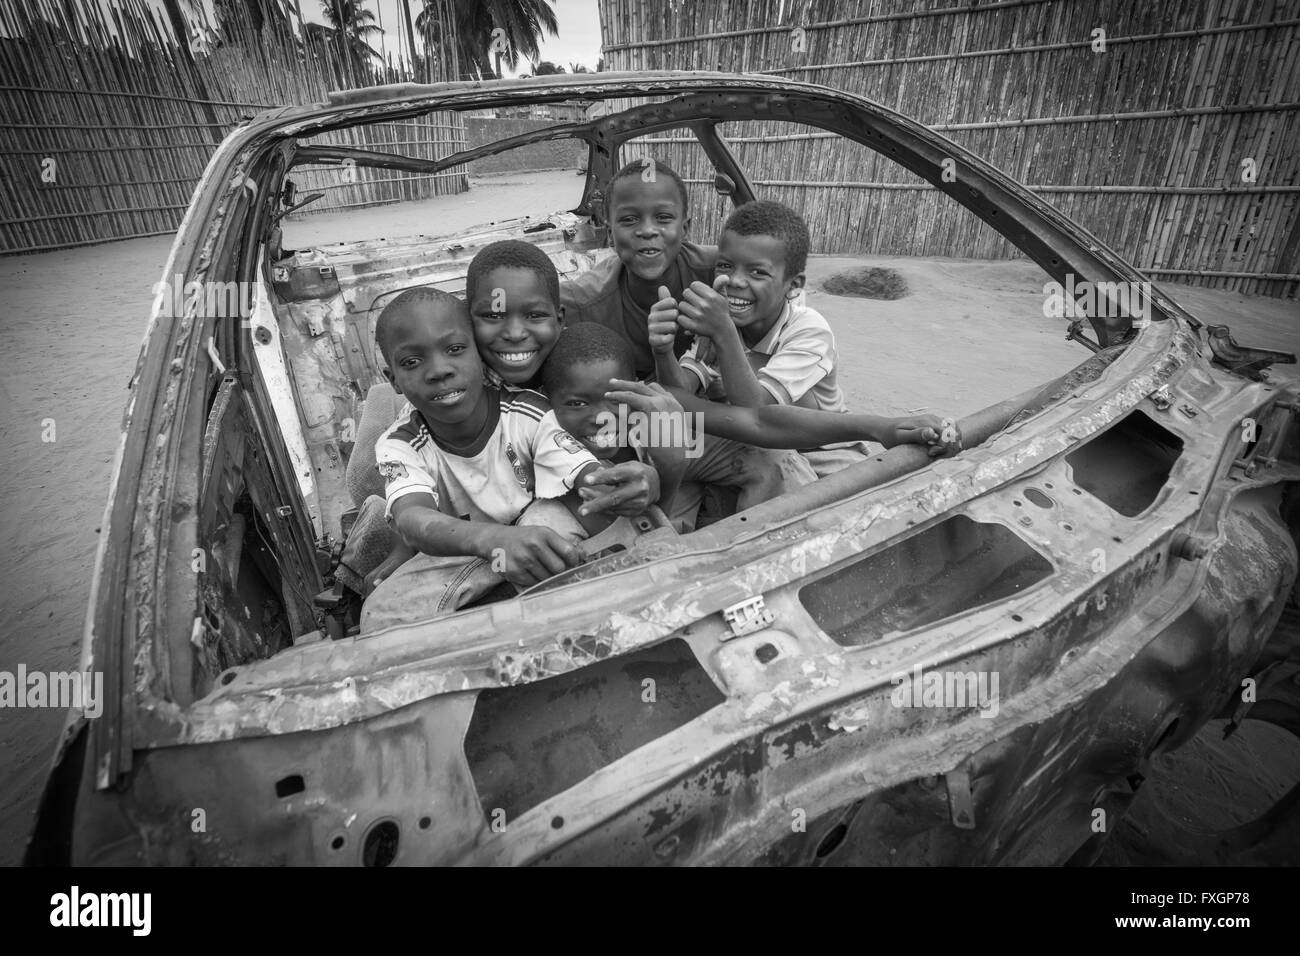 Mozambique, happy children playing in a damaged car, black and white. Stock Photo